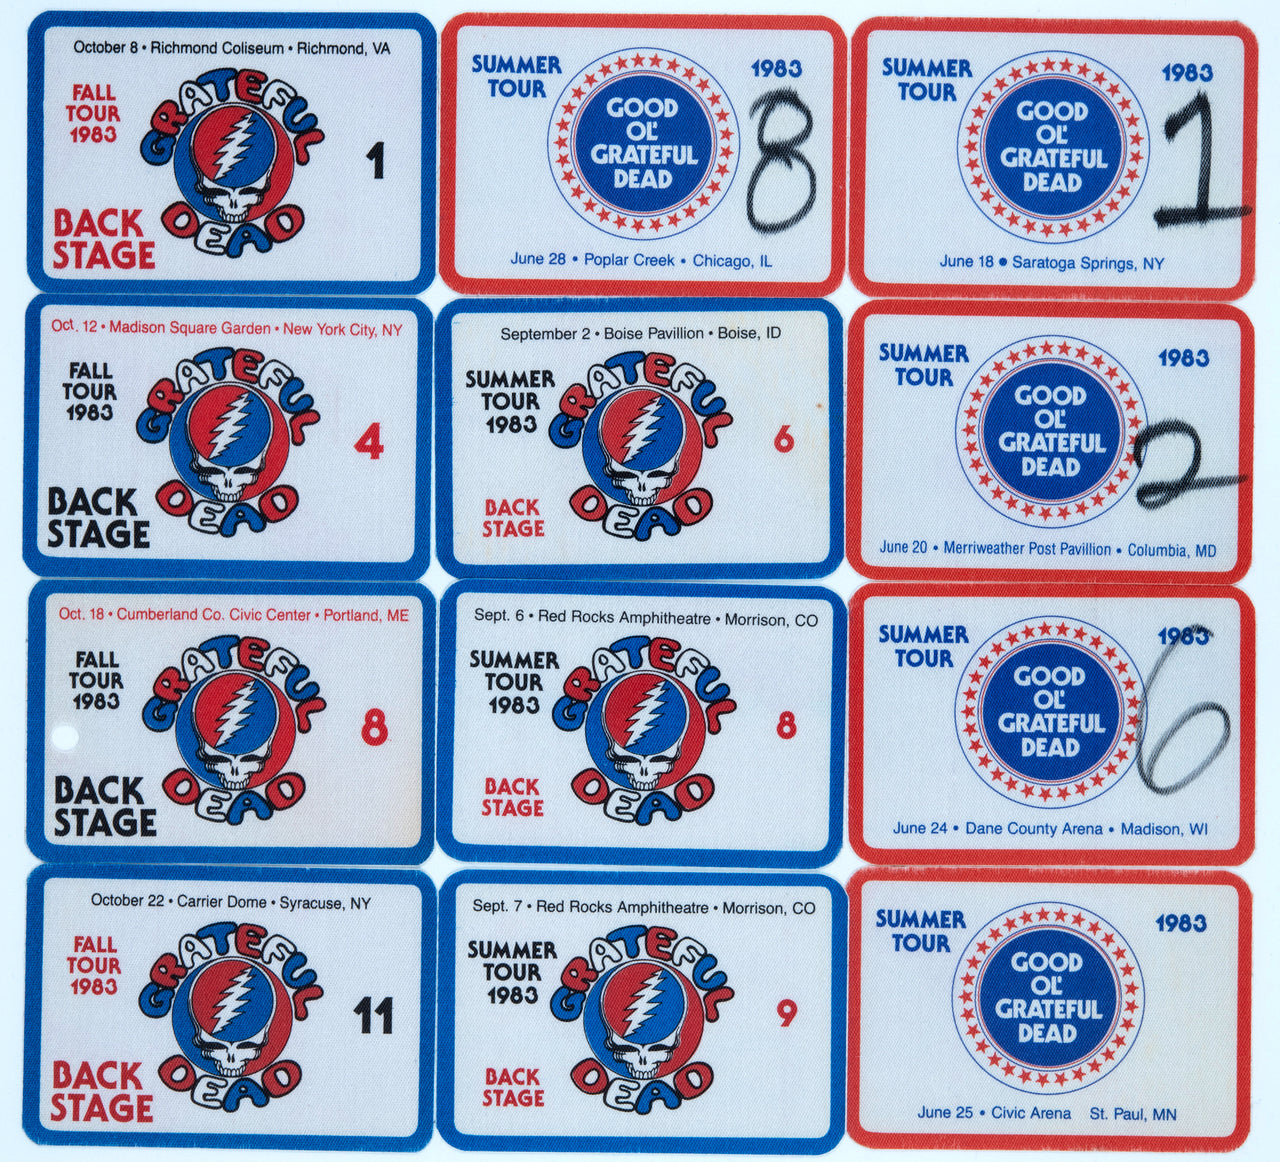 Grateful Dead Backstage Passes (9/9/1982 - 9/24/1982) from Dan Healy